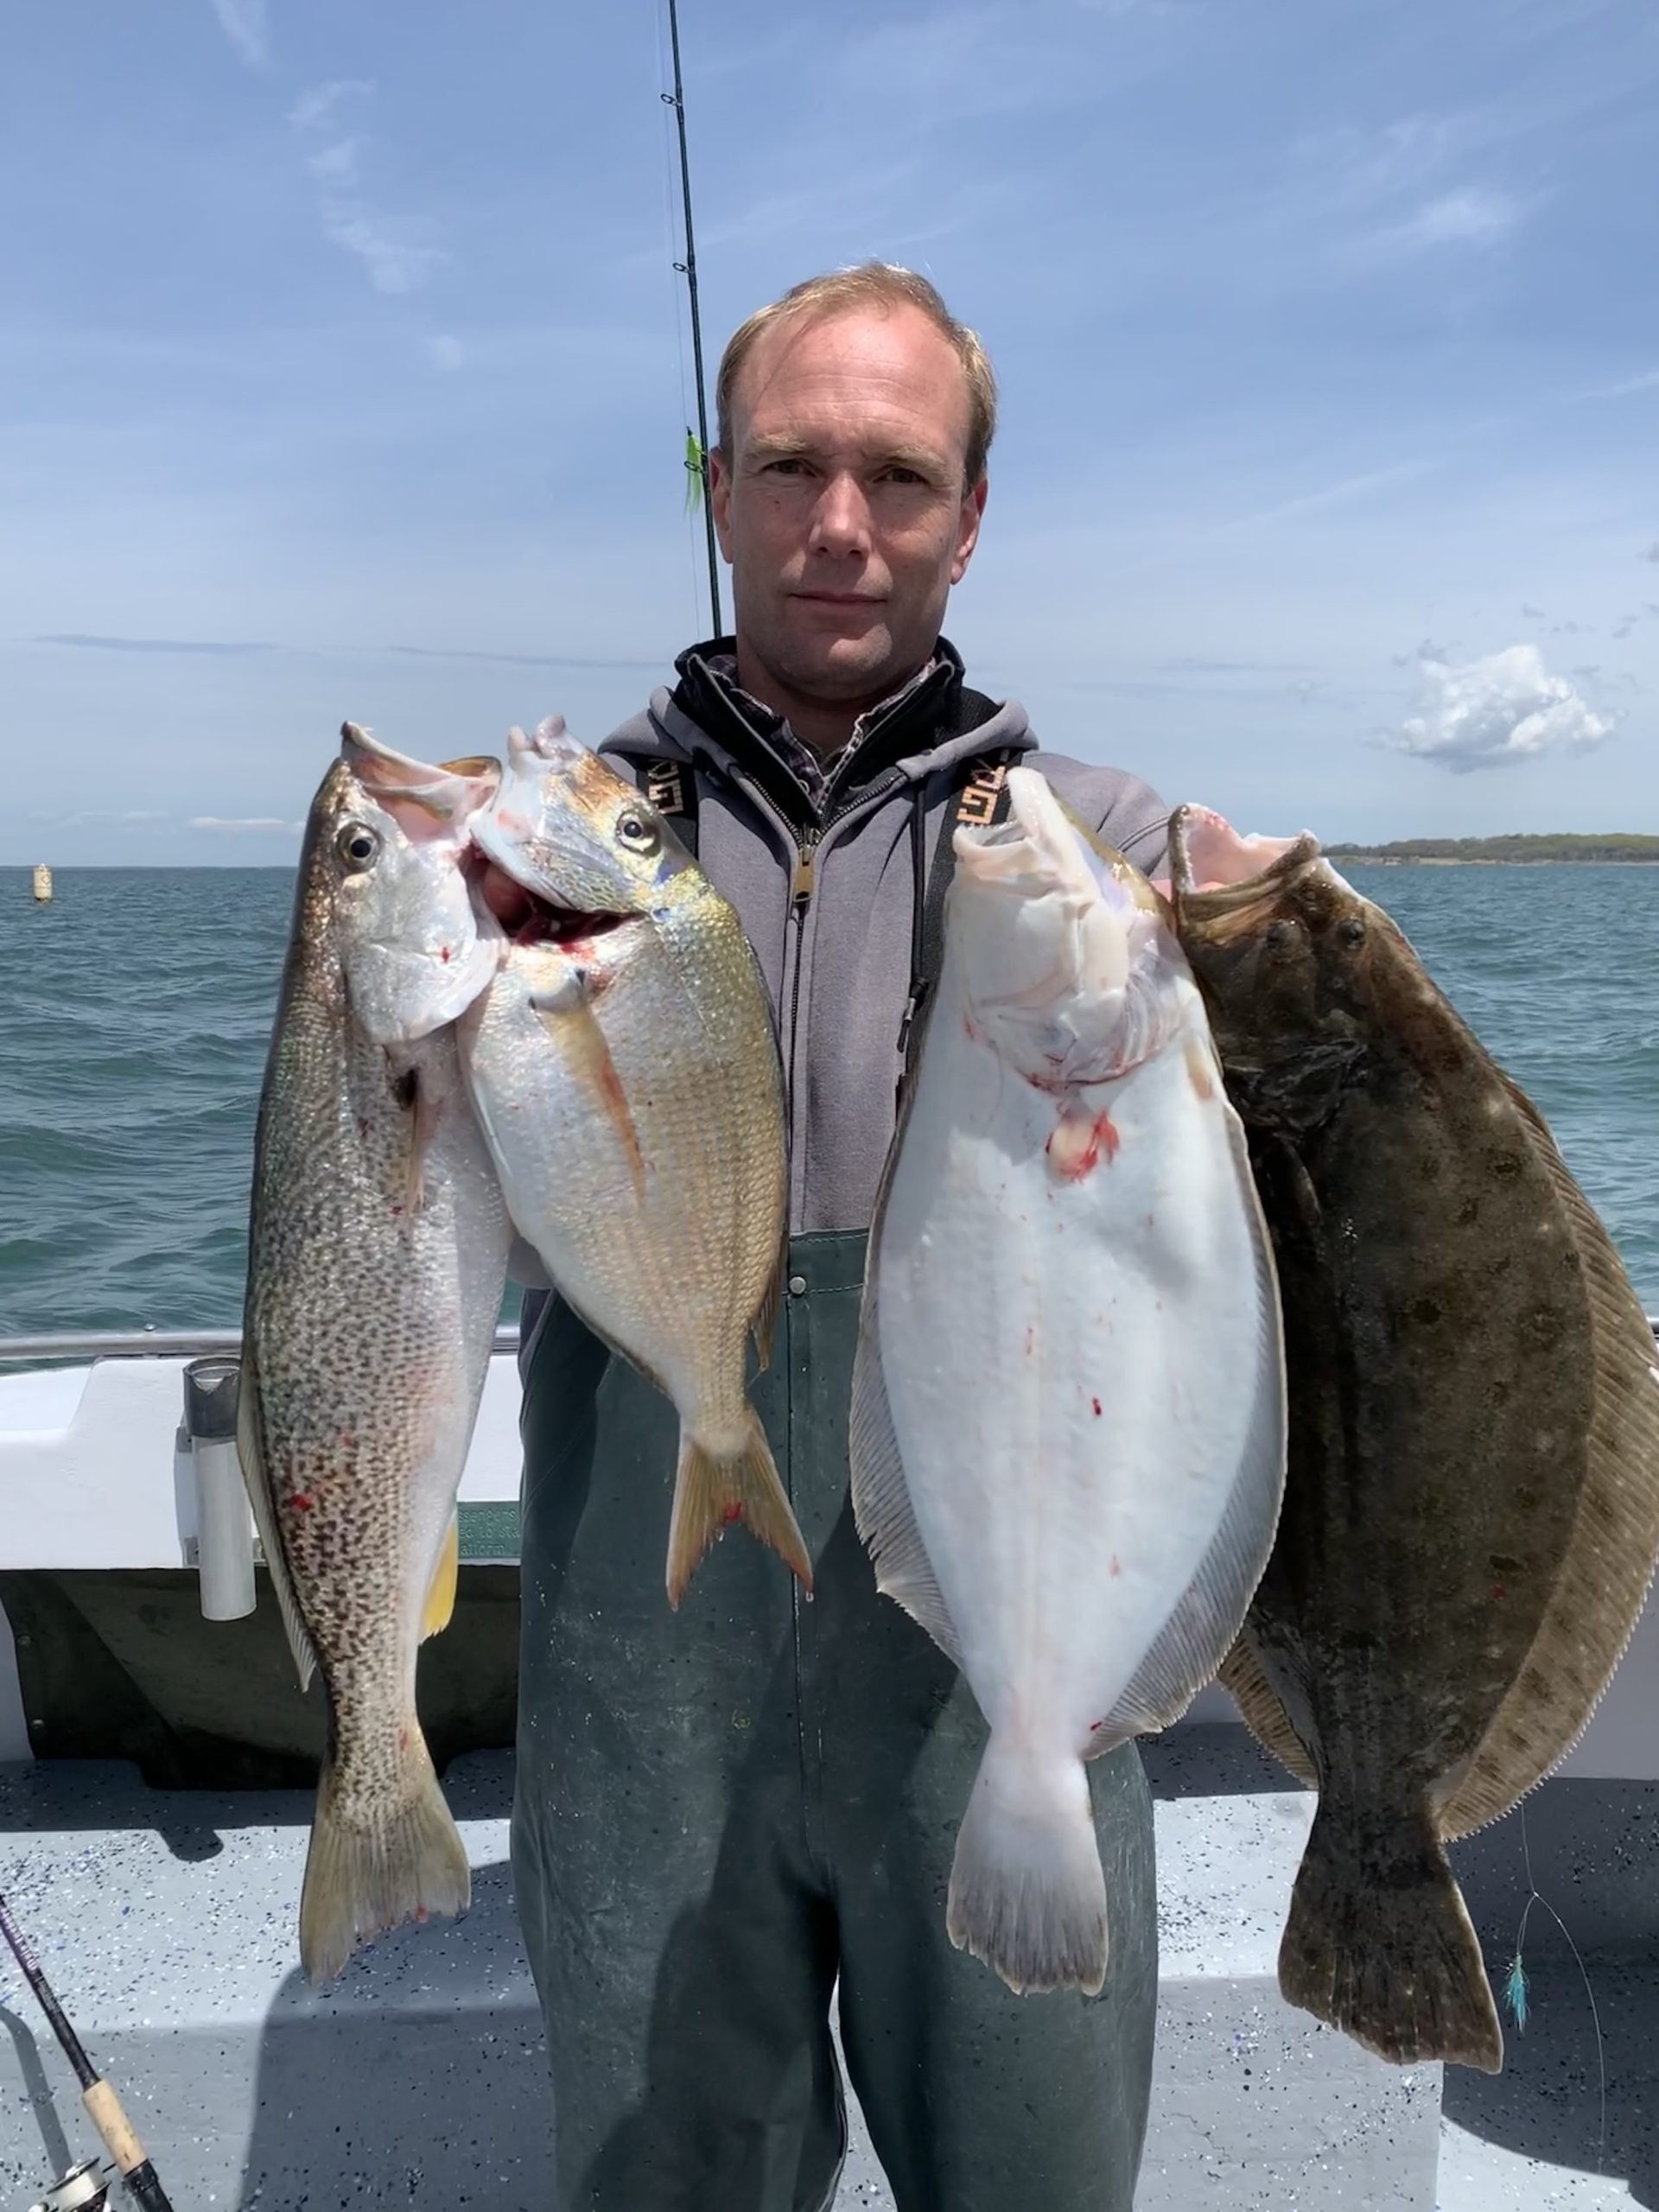 Matt Hayman with a Peconic Bay trifecta aboard the Shinnecock Star over the weekend. Weakfish, porgies and fluke, and some striped bass and bluefish, too, are being caught in growing numbers in the same stretches of the bays these days.  Deena Lippman